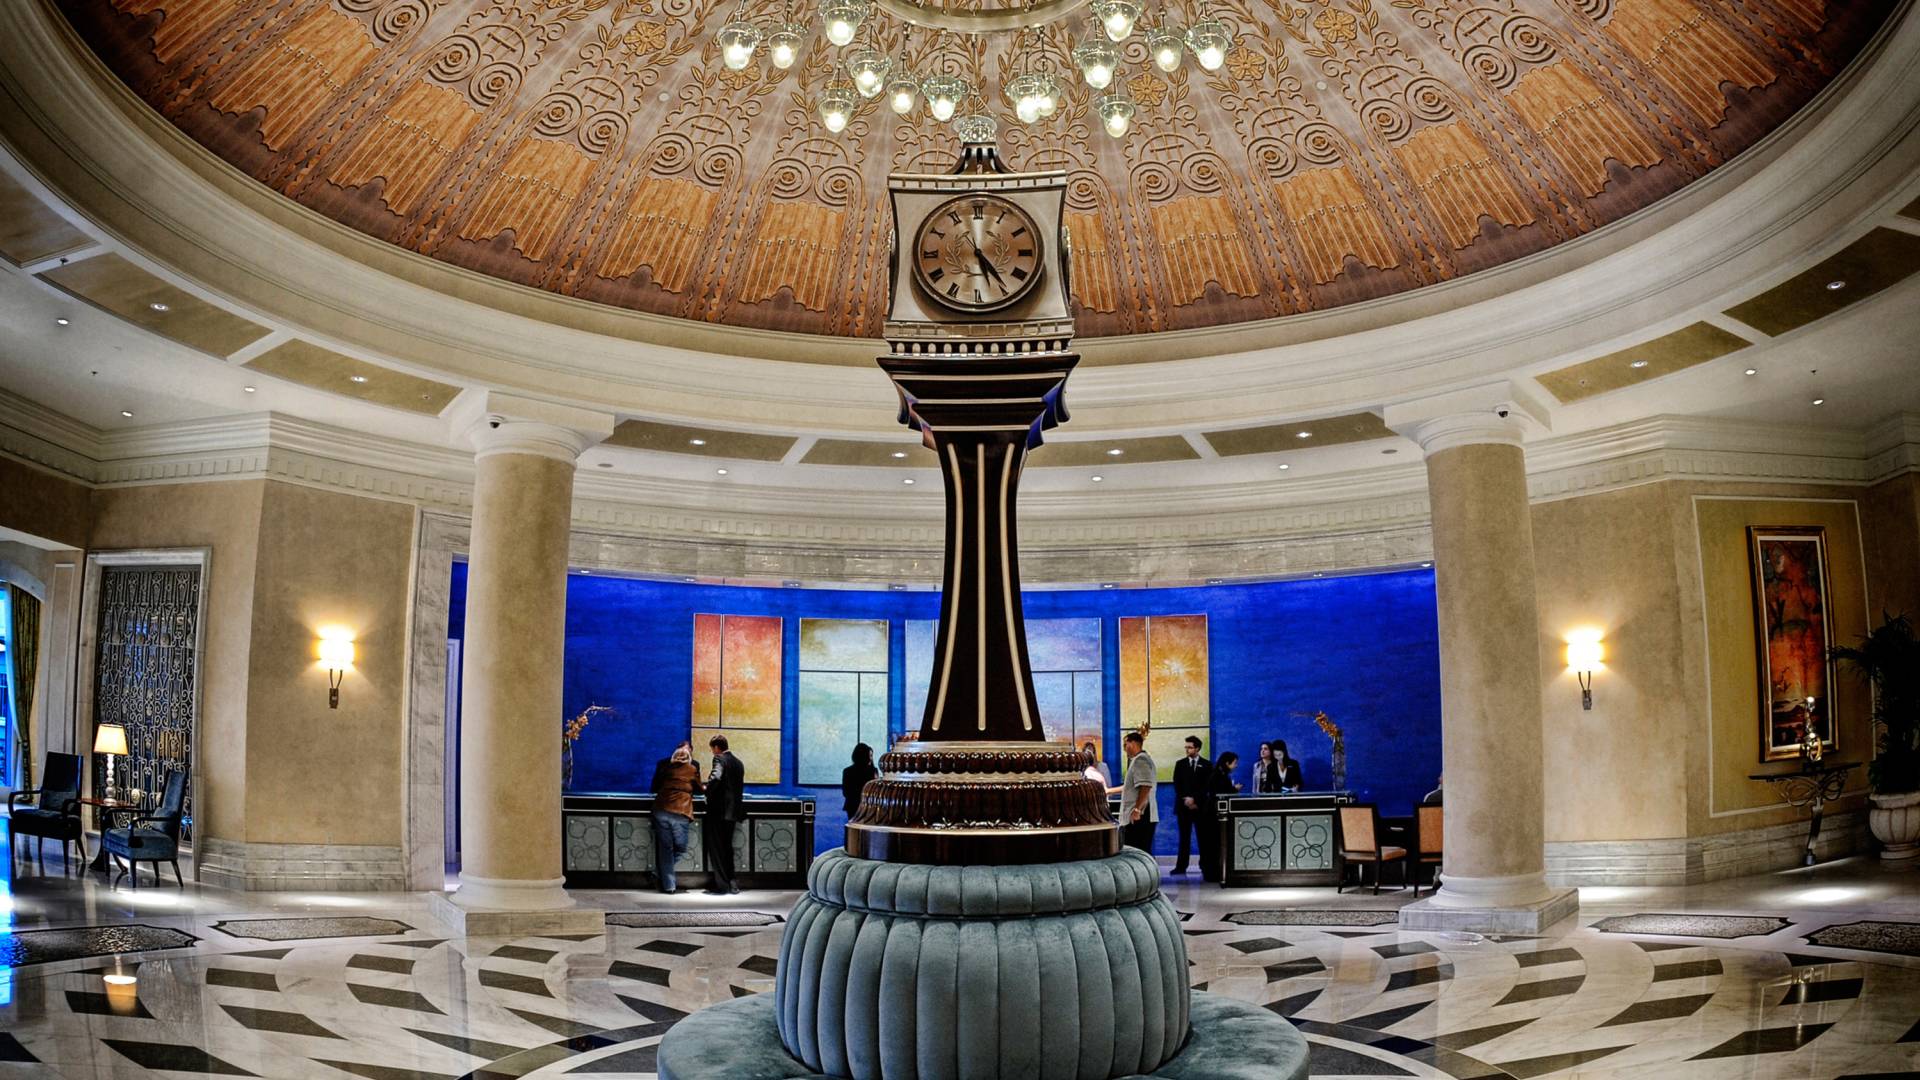 Lobby with Clock and Ornate Ceiling